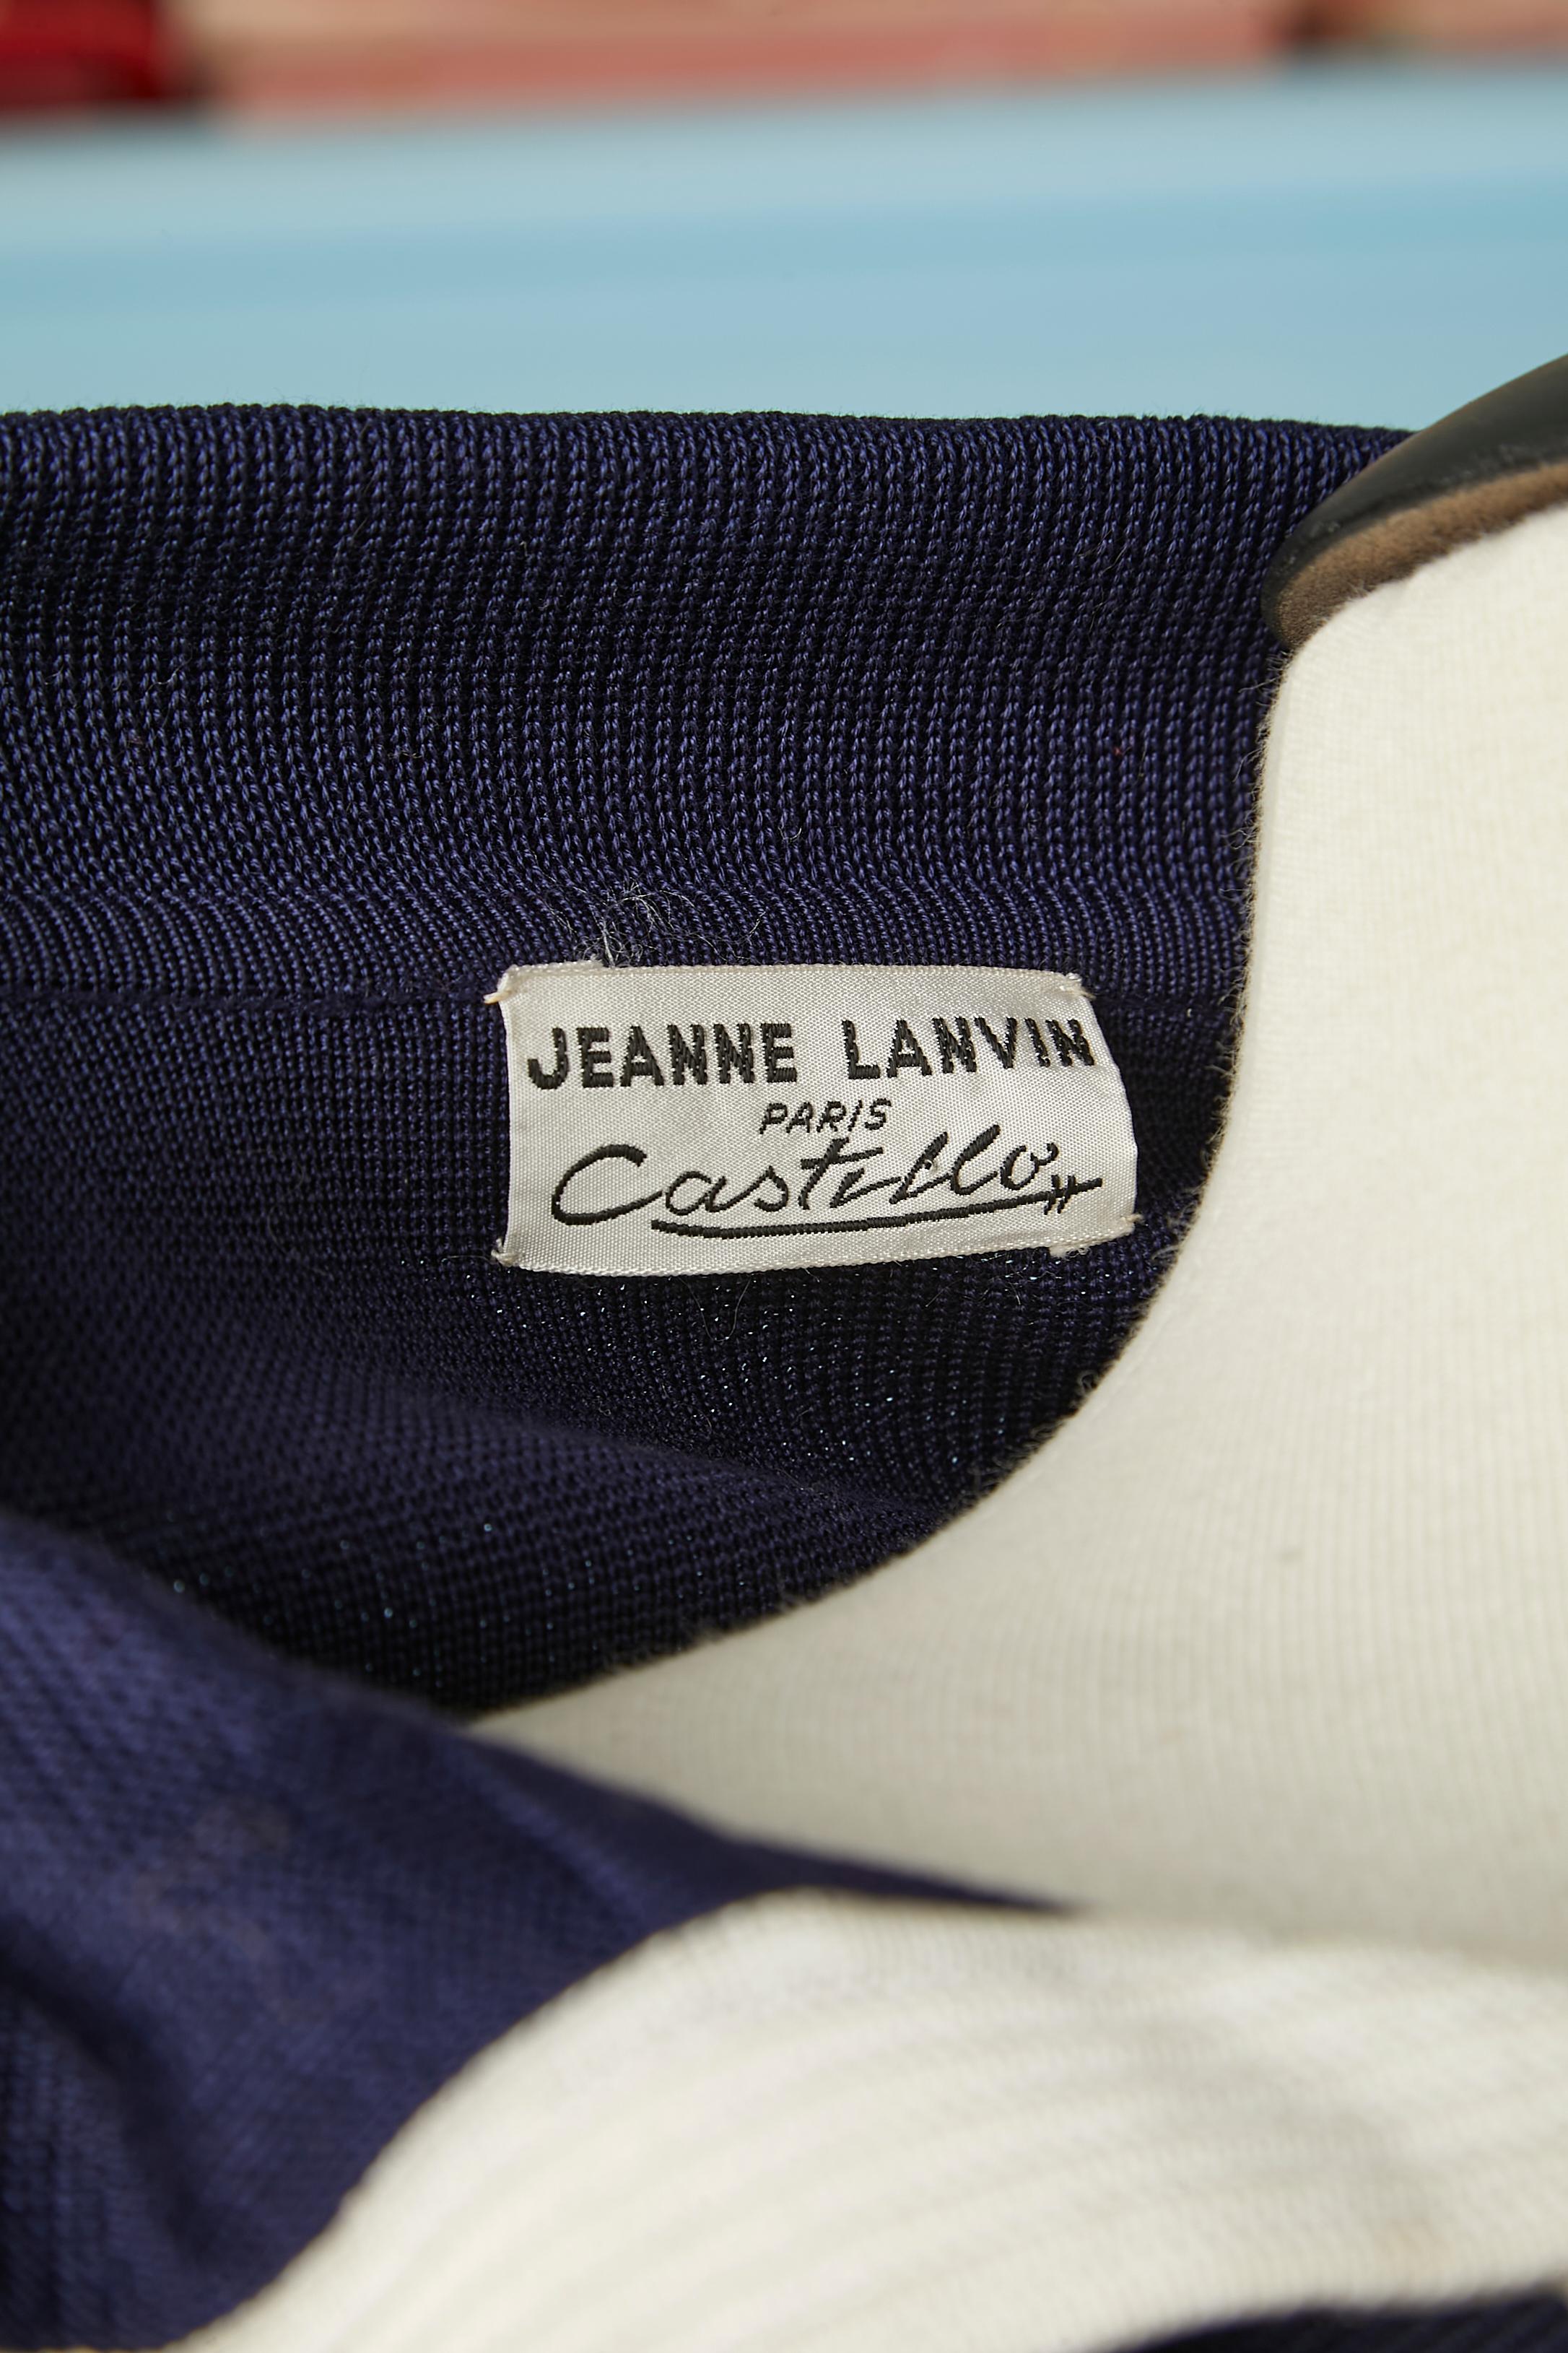 Navy blue rayon knit polo-shirt with white stripes Jeanne Lanvin Castillo  1